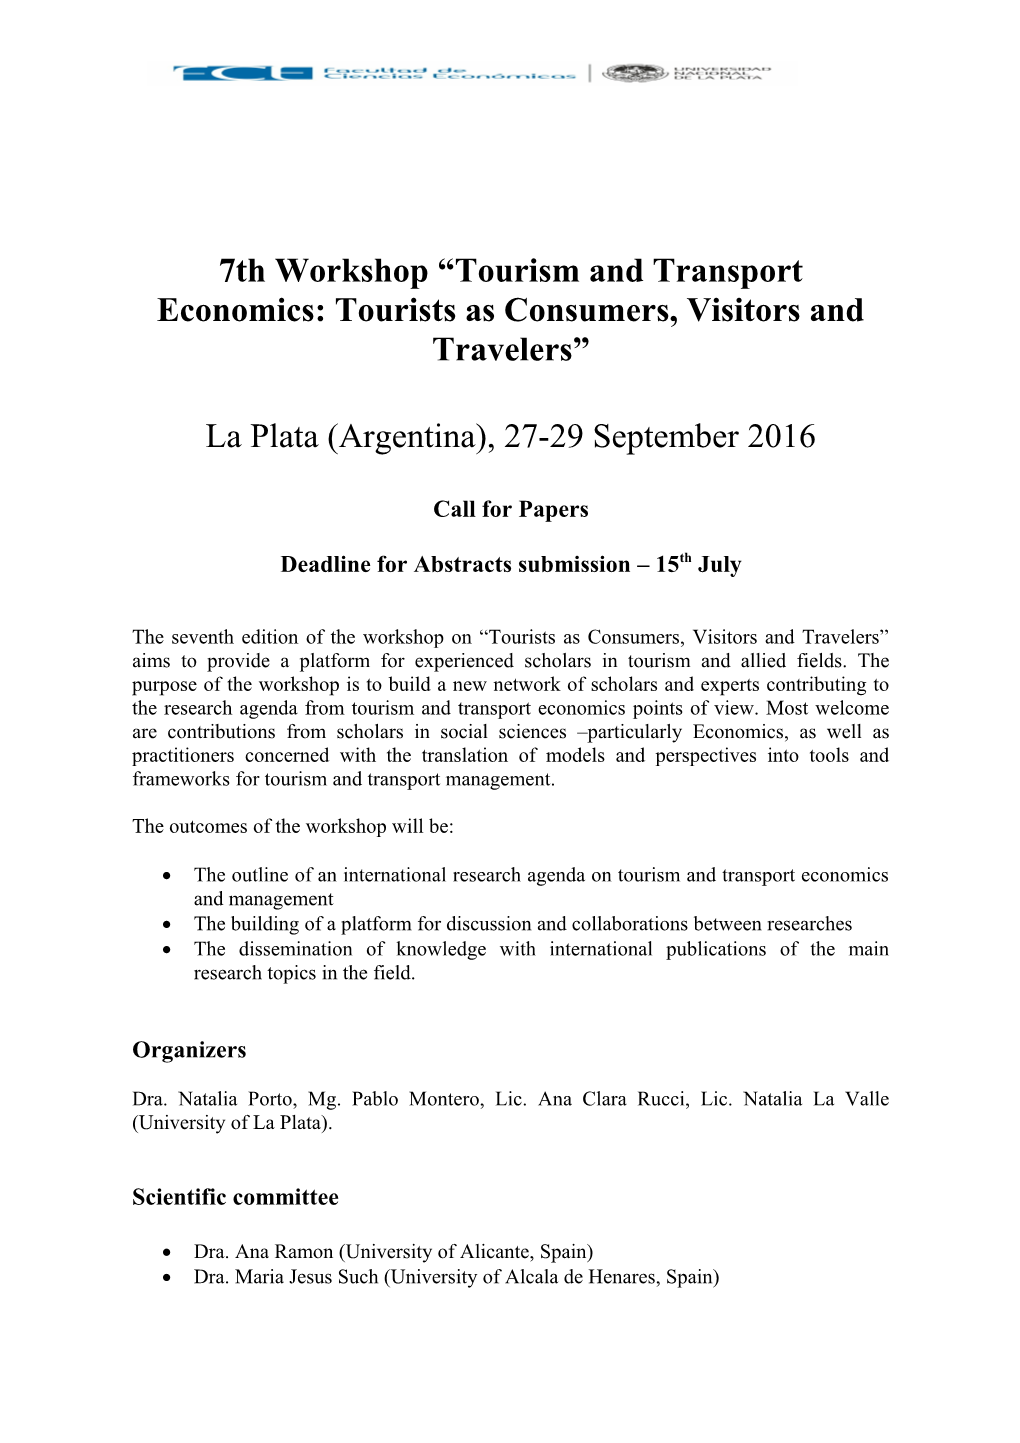 7Th Workshop Tourism and Transport Economics: Tourists As Consumers, Visitors and Travelers